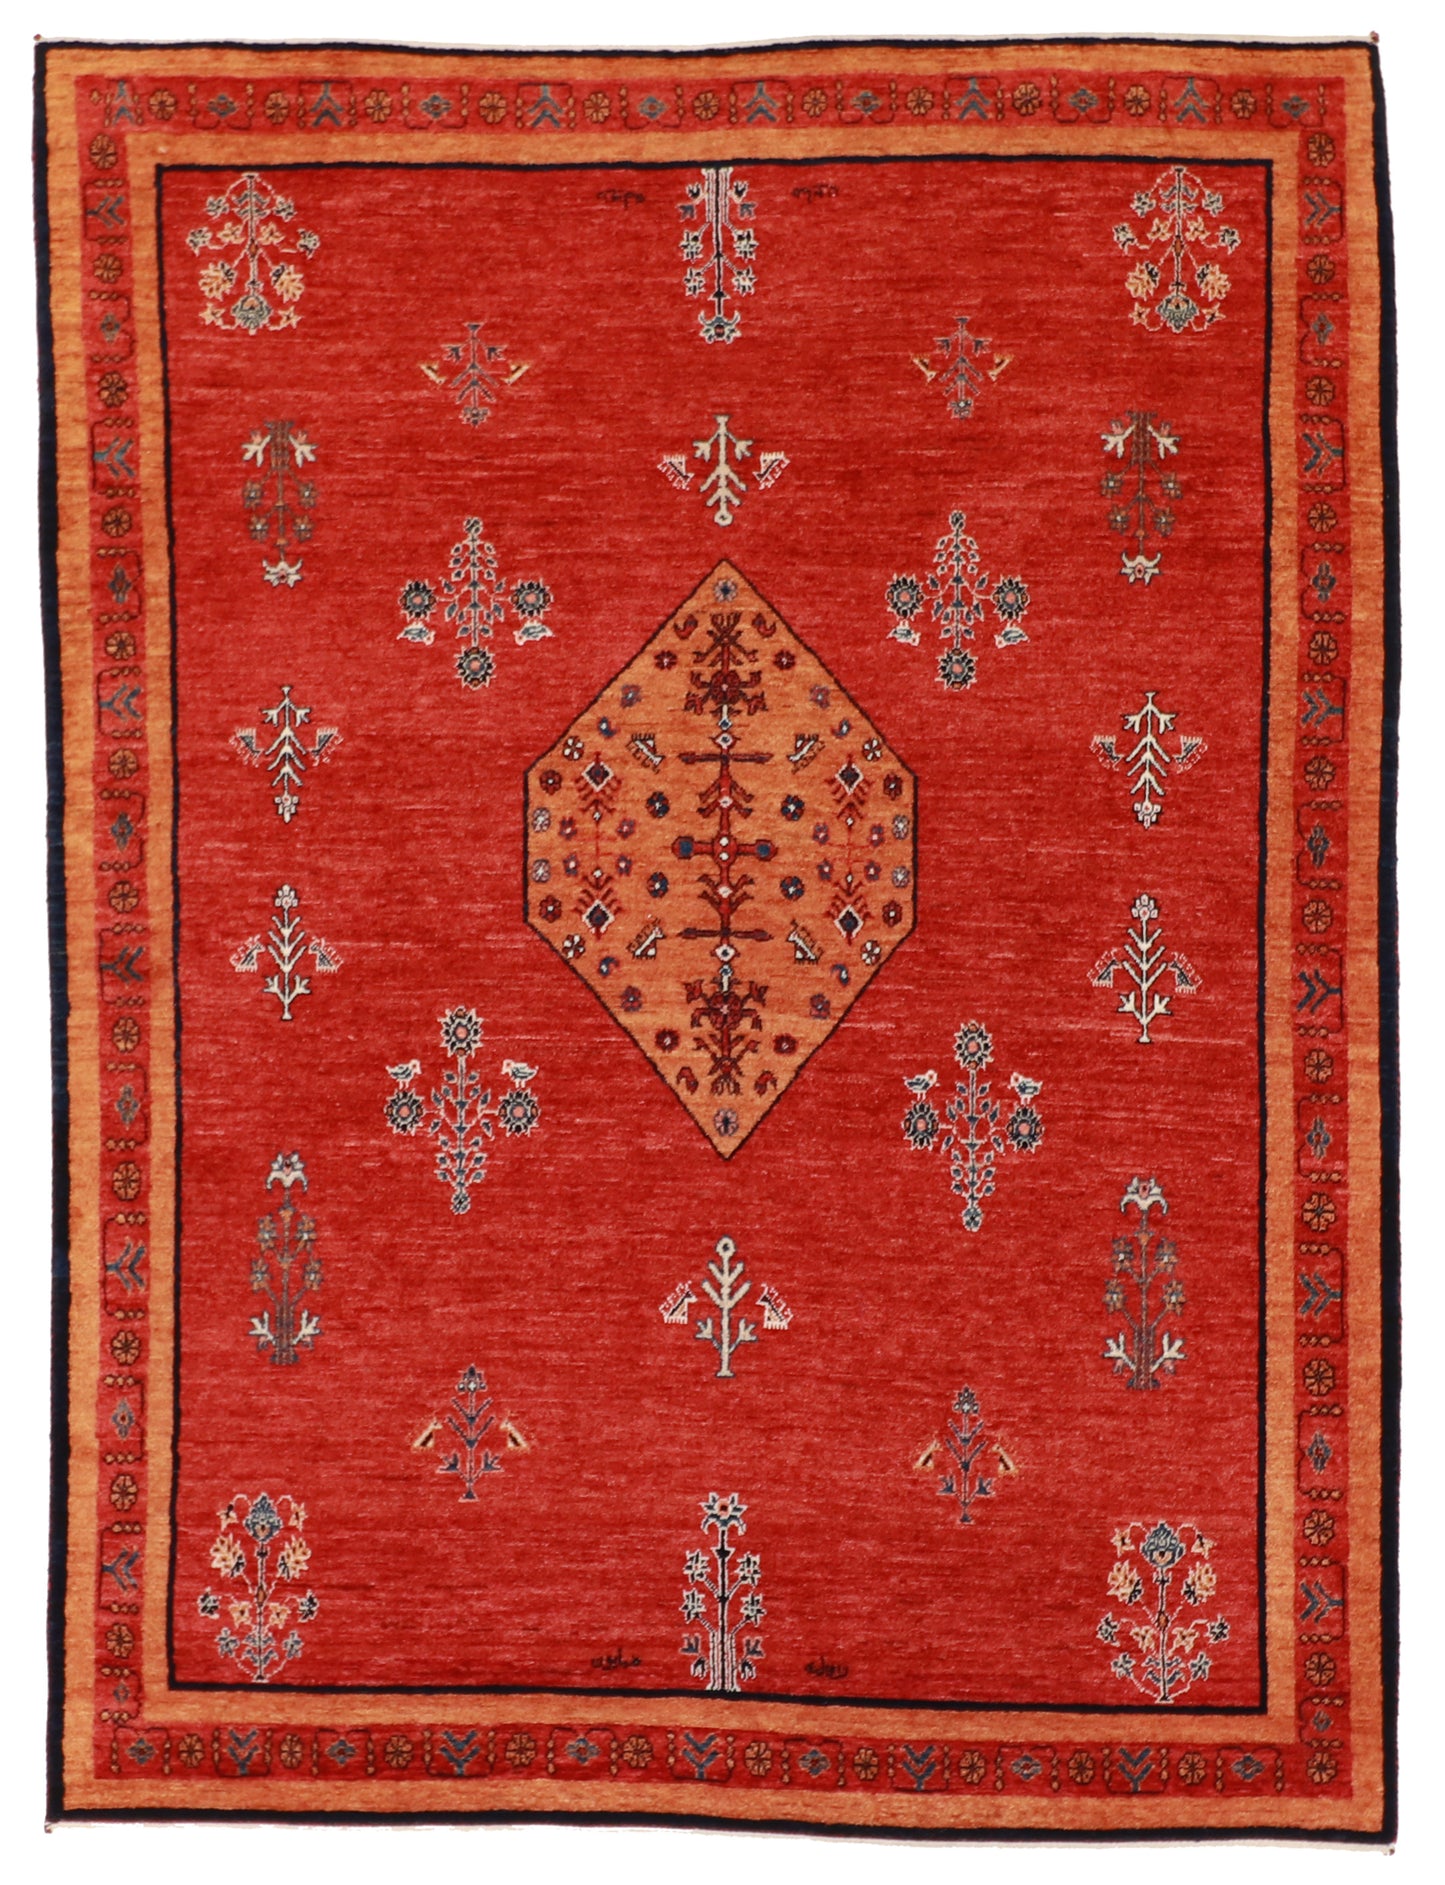 5x7 - Lori Baft Fine/Wool All Over Rectangle - Hand Knotted Rug